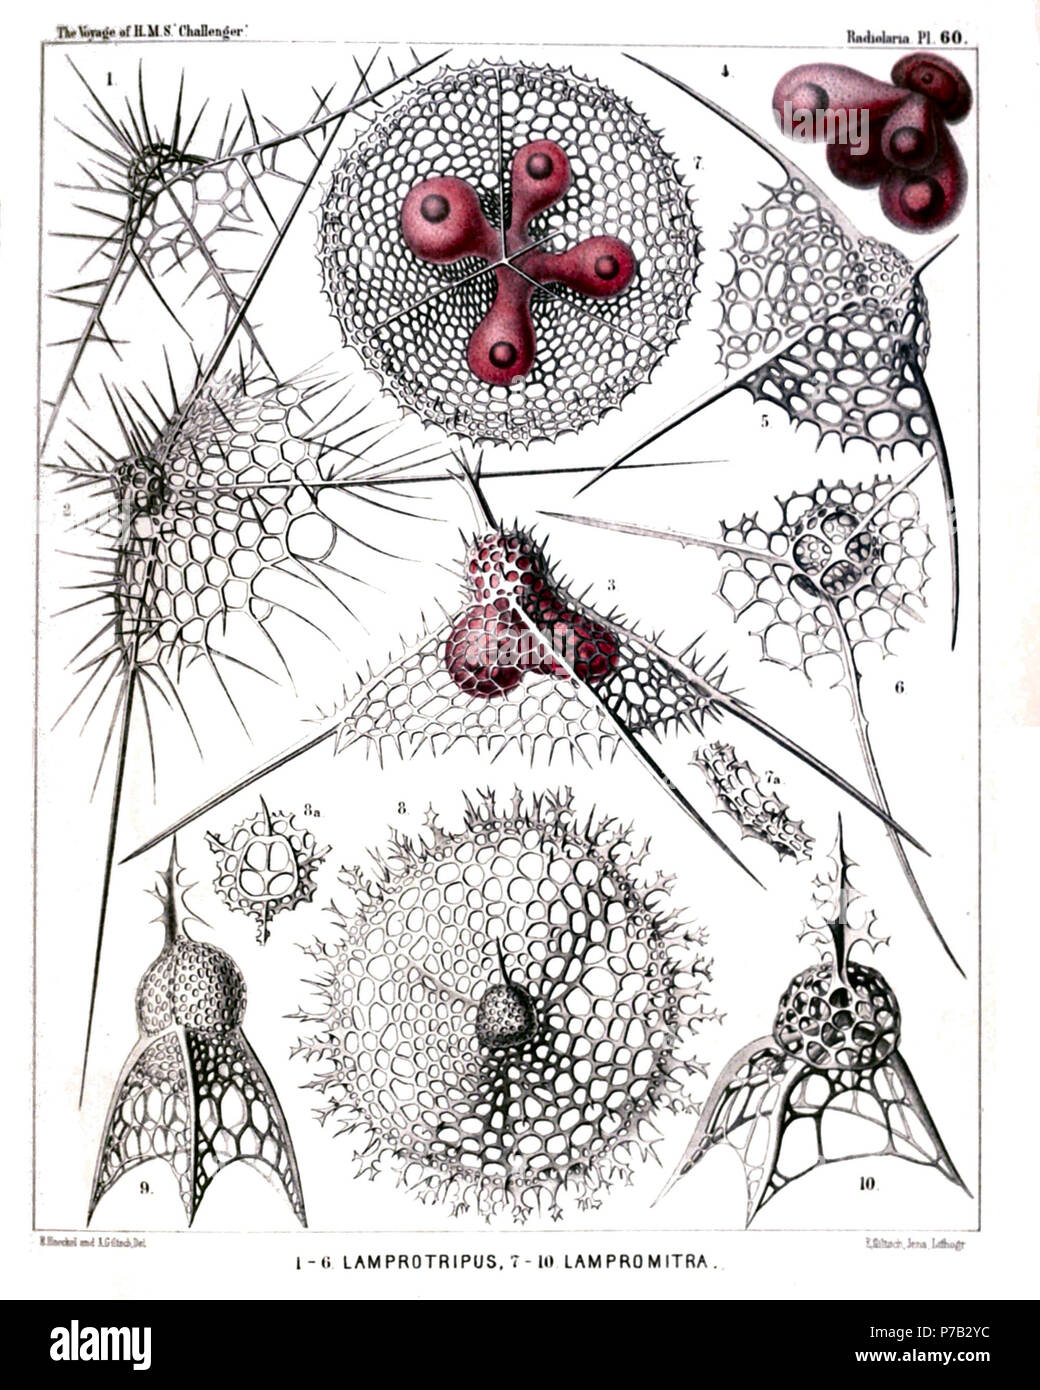 English: Illustration from Report on the Radiolaria collected by H.M.S. Challenger during the years 1873-1876. Part III. Original description follows:  Plate 60. Tripocyrtida.  Diam.  Fig. 1. Dictyophimus cienkowskii, n. sp. (vel Lamprotripus squarrosus), × 300  Shell seen from the side.  Fig. 2. Dictyophimus bütschlii, n. sp. (vel Lamprotripus horridus), × 300  Fig. 3. Dictyophimus hertwigii, n. sp. (vel Lamprotripus spinosus), × 400  The cephalis of the shell includes the central capsule, with three lobes depending in the pyramidal thorax.  Fig. 4. Dictyophimus platycephalus, n. sp., × 400   Stock Photo